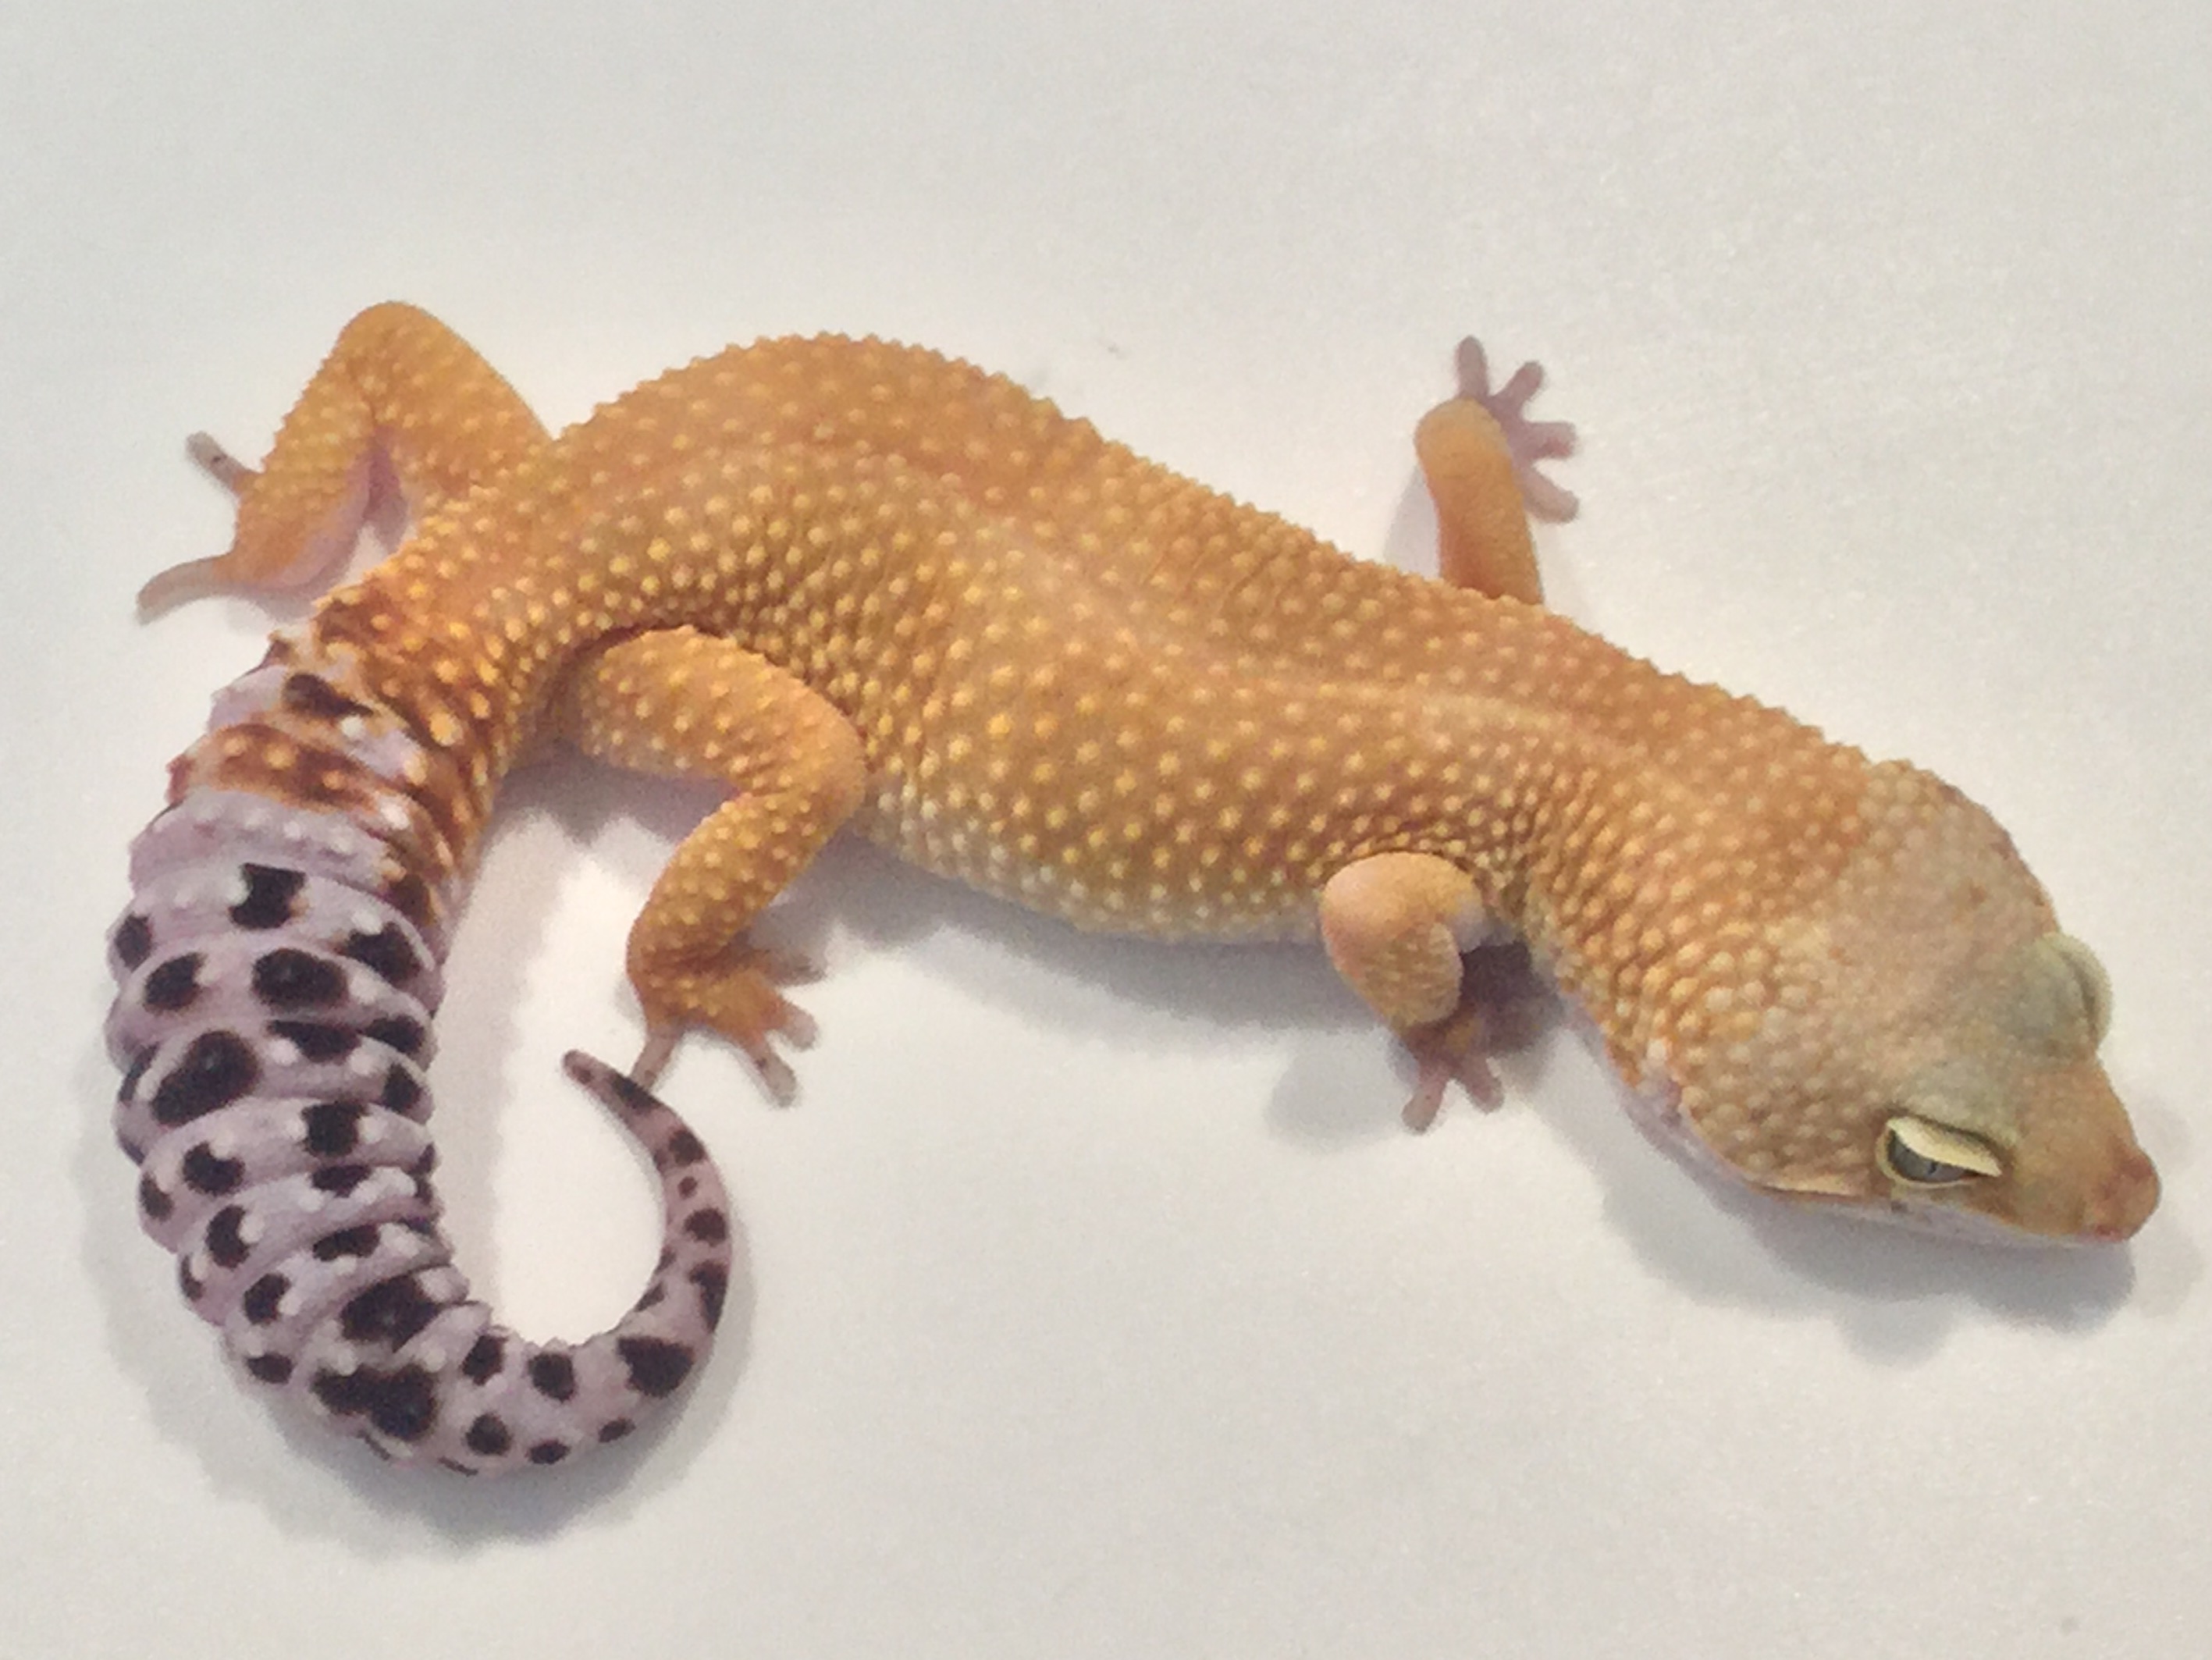 Super Hypo Carrot Tail Baldy Leopard Gecko for Sale